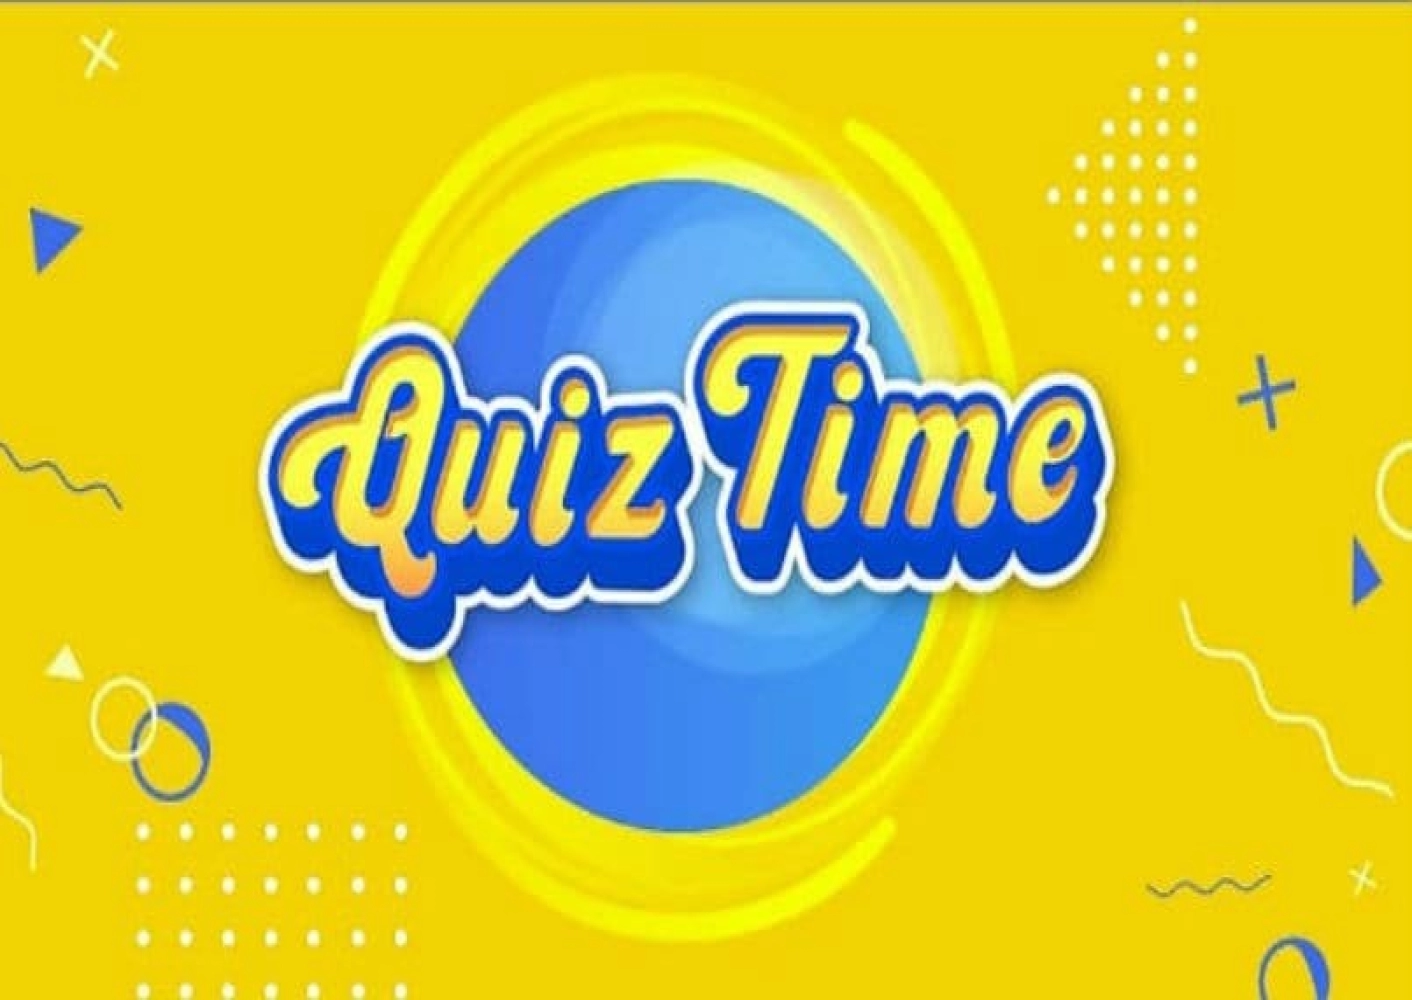 FLIPKART QUIZ: DAILY LIVE NOW, ANSWERS LEAKED 16, JAN, 2021